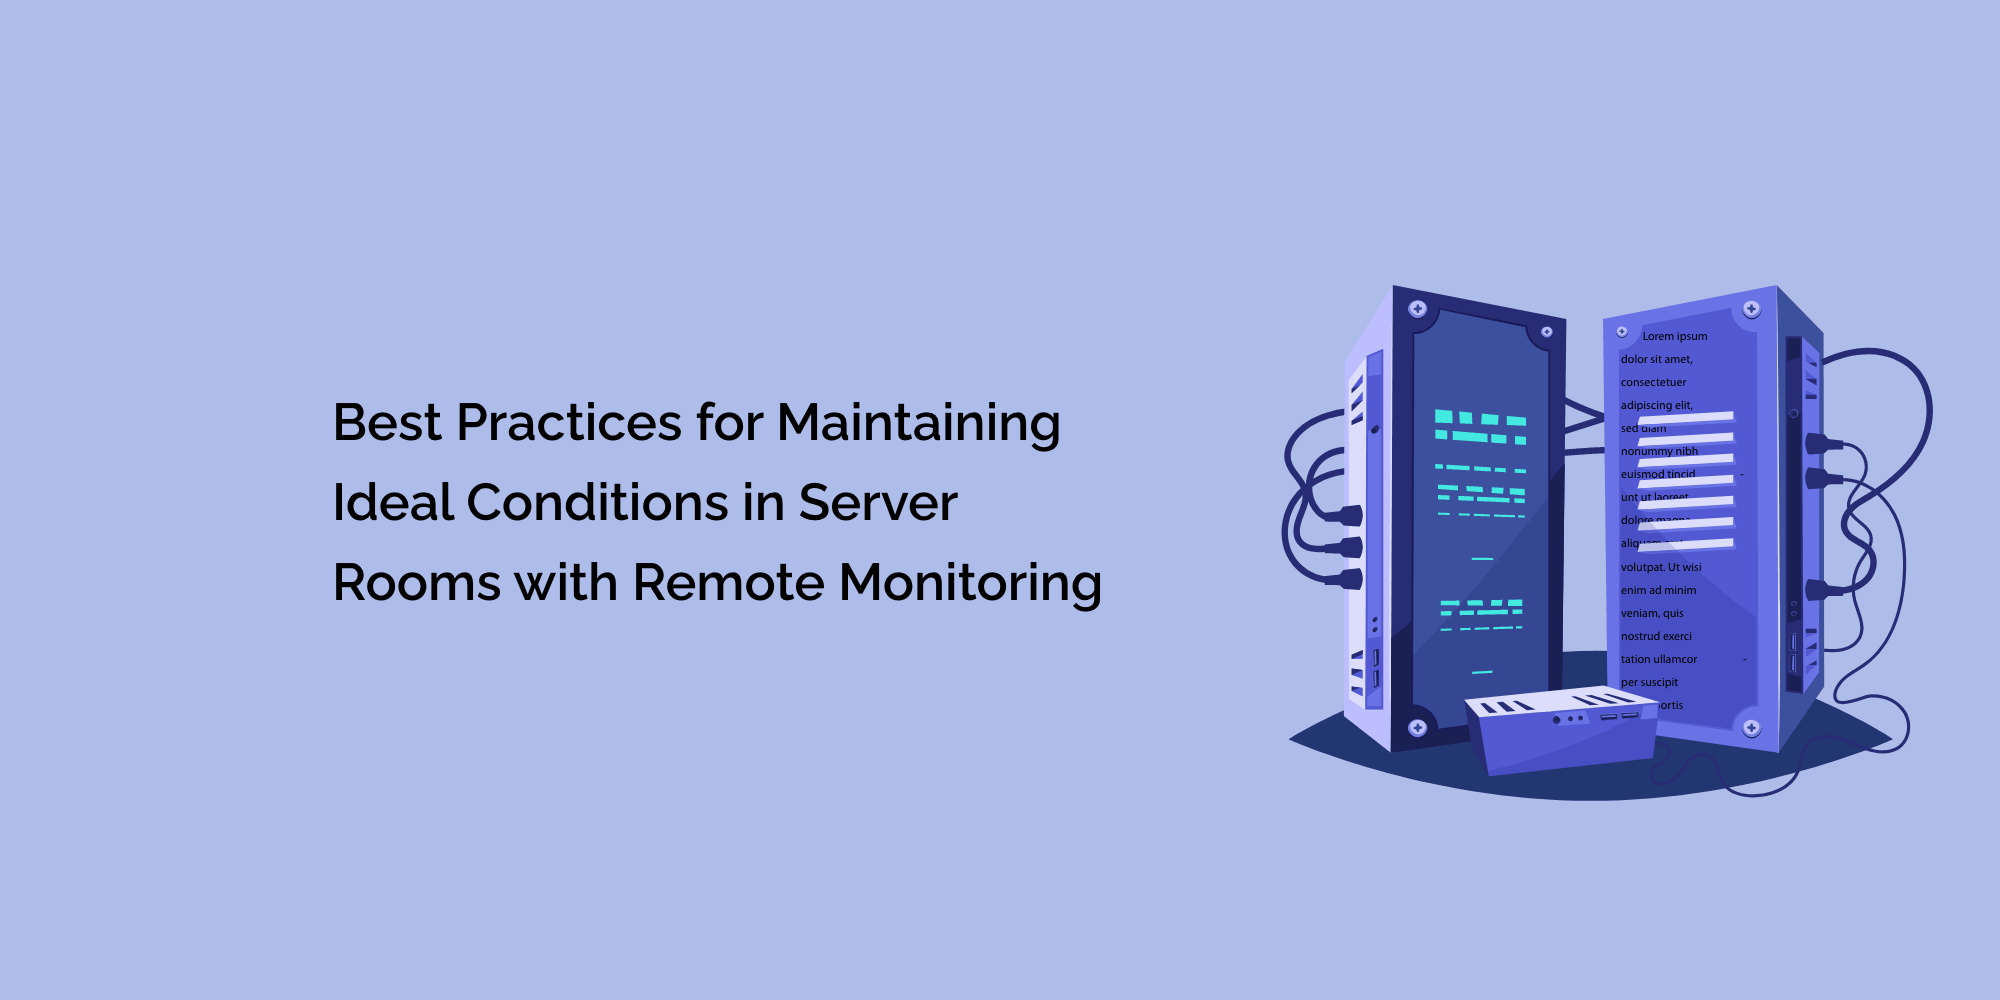 Best Practices for Maintaining Ideal Conditions in Server Rooms with Remote Monitoring